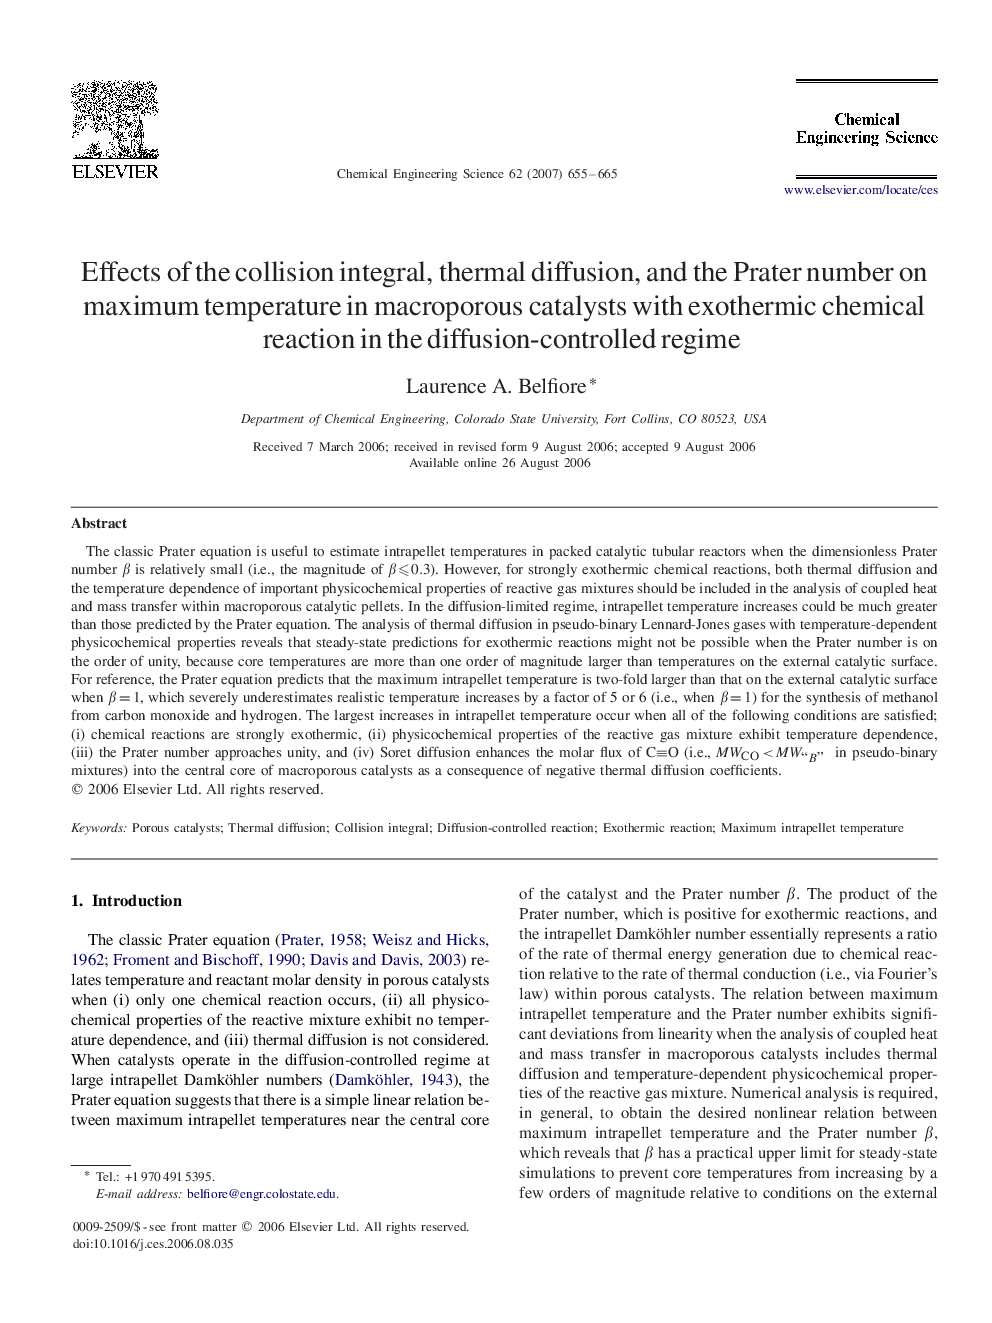 Effects of the collision integral, thermal diffusion, and the Prater number on maximum temperature in macroporous catalysts with exothermic chemical reaction in the diffusion-controlled regime